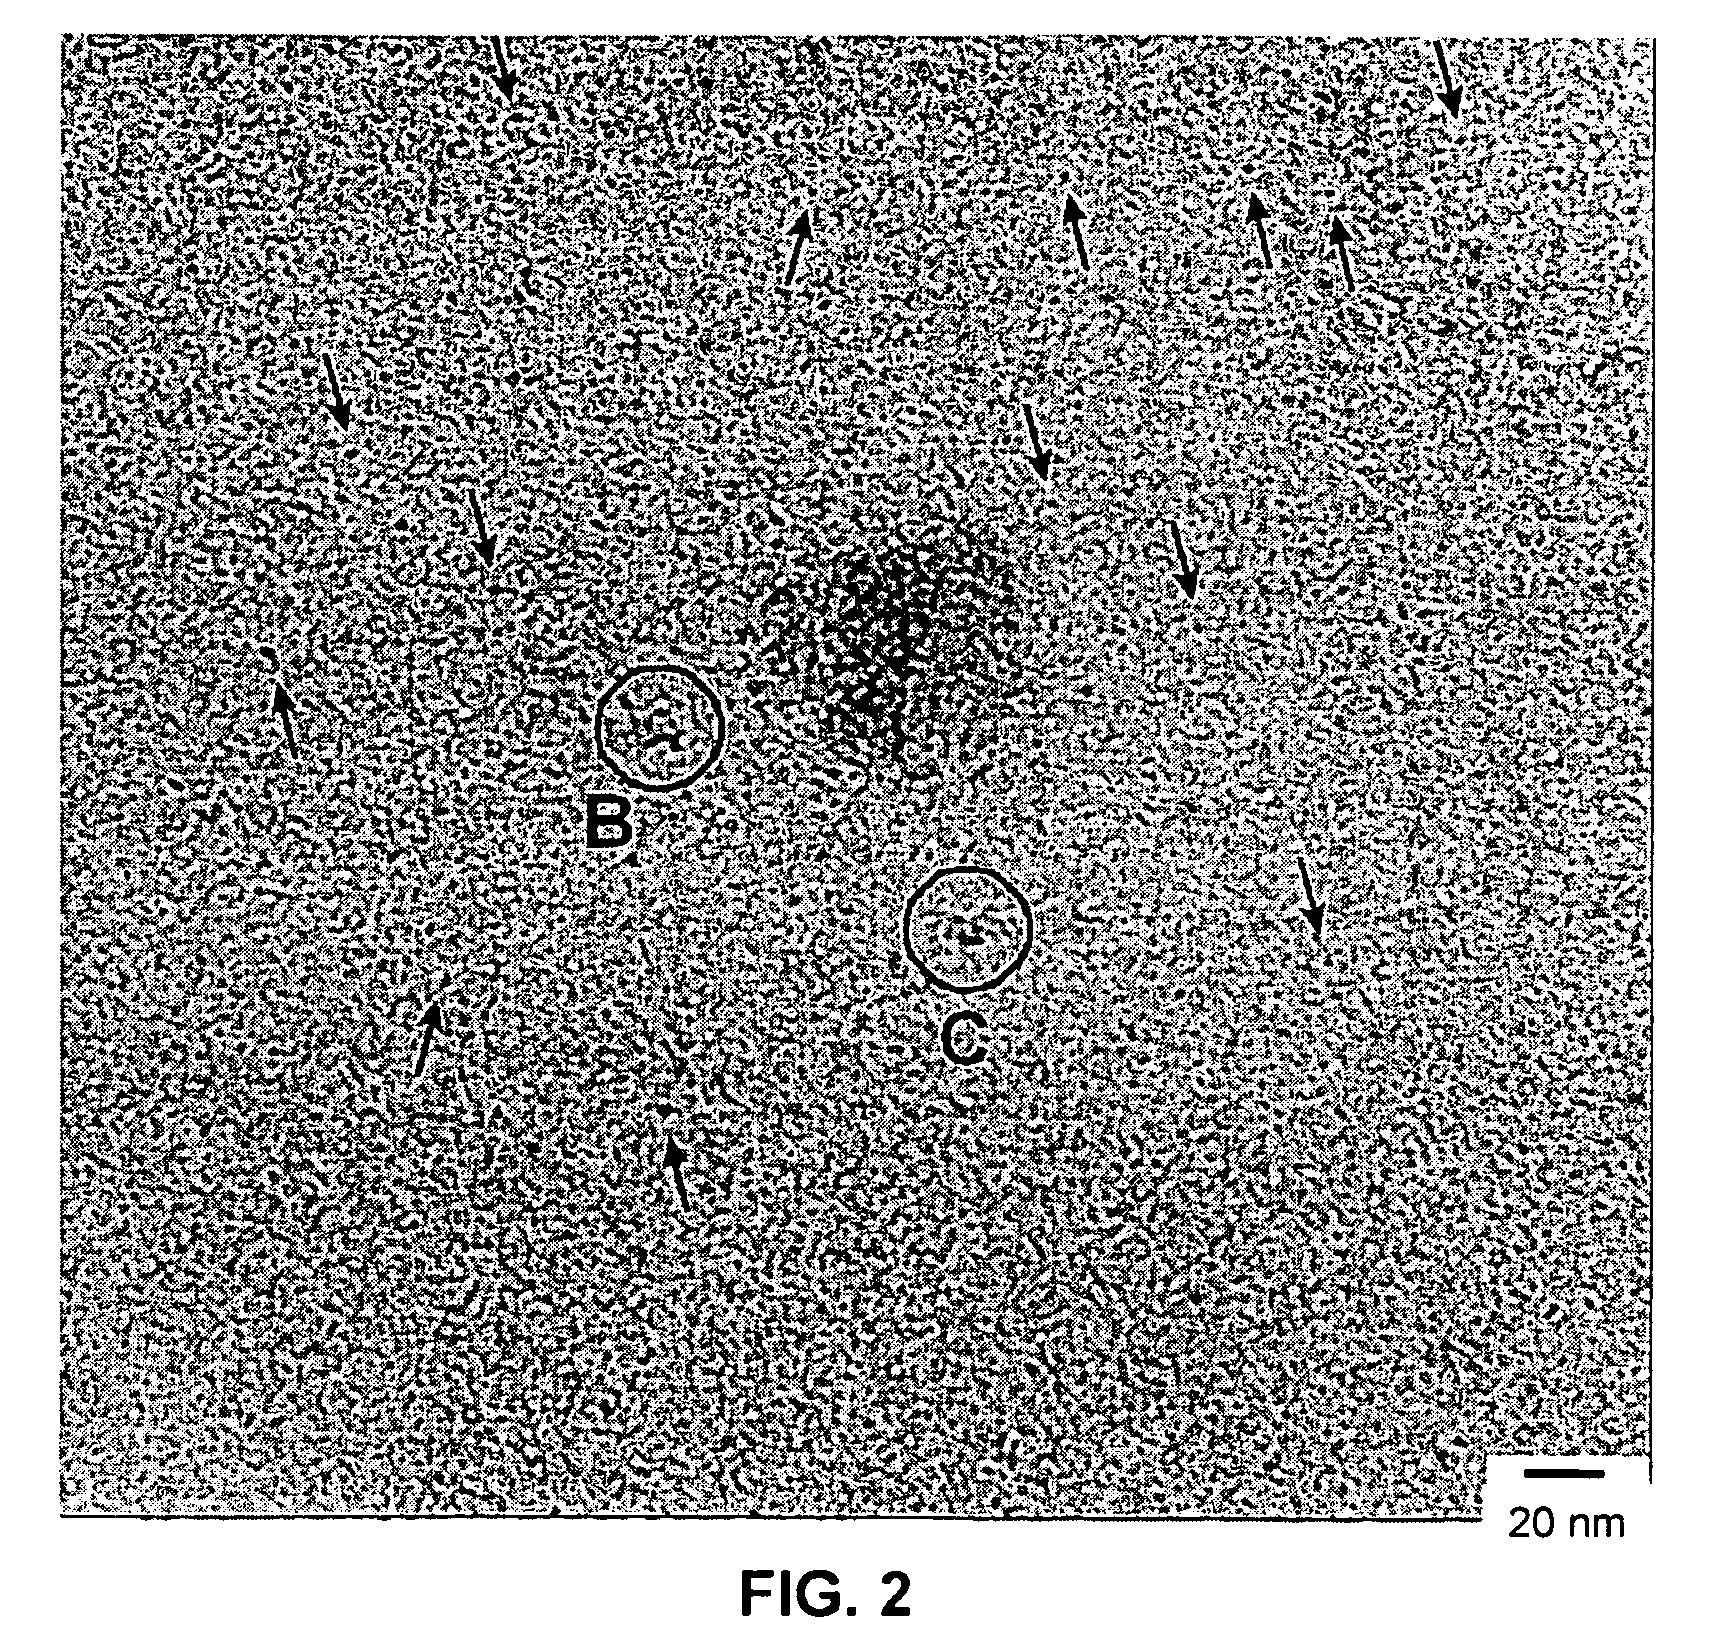 Method of forming stable functionalized nanoparticles